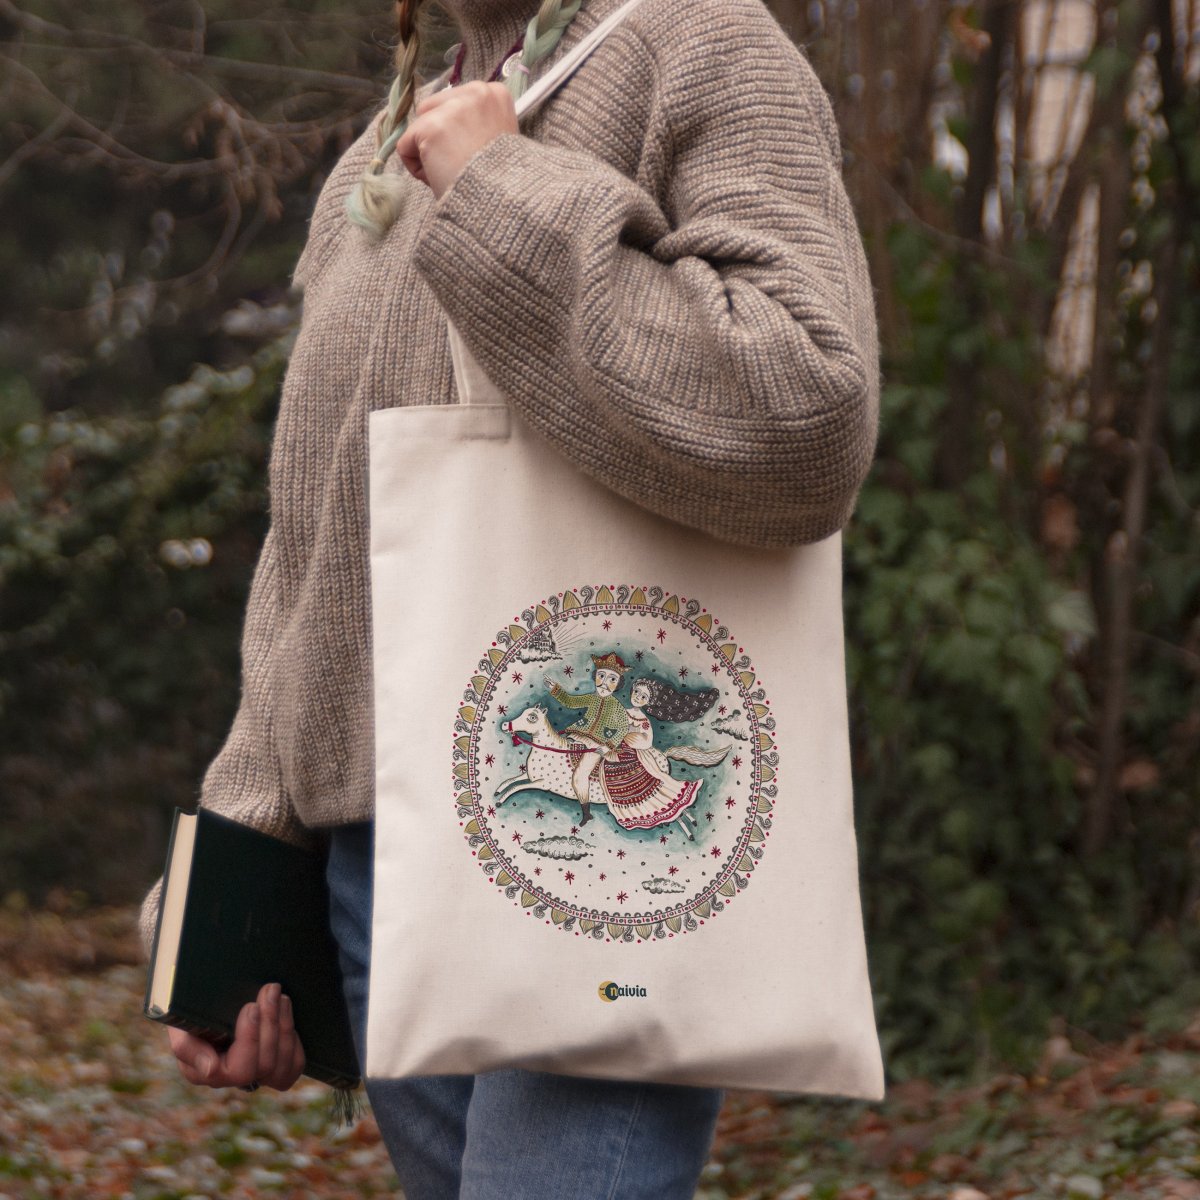 Printed Tote Bag, "Fly me to the Moon", 100% cotton, 31x40 cm